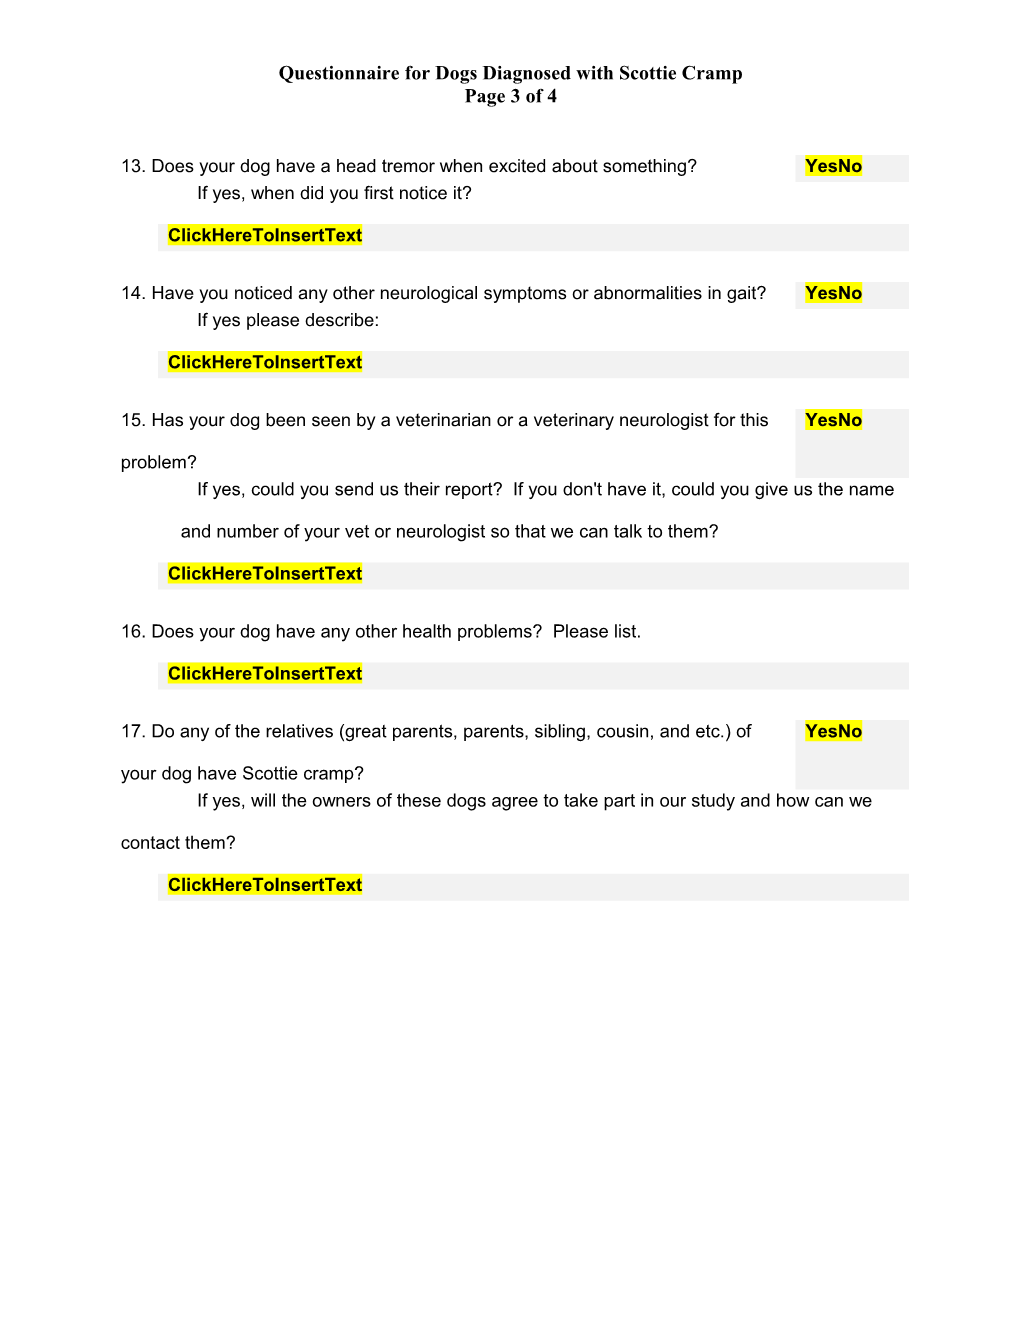 Questionnaire for Dogs Diagnosed with Scottie Cramp Page 1 of 4